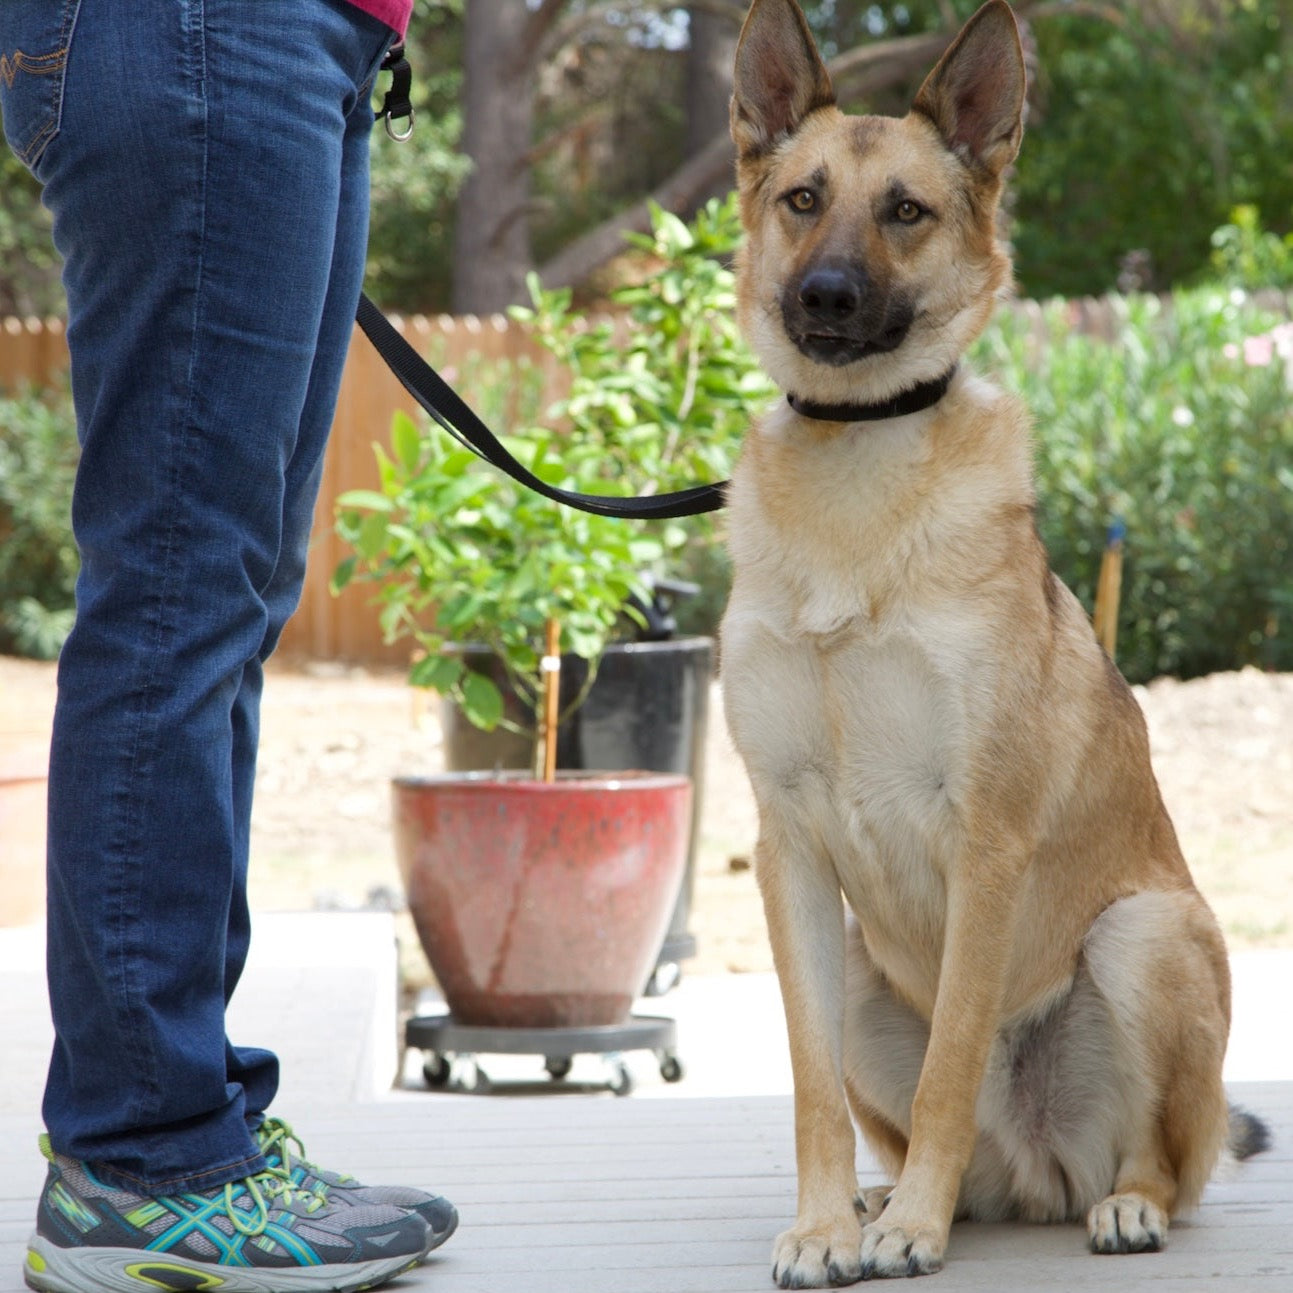 a photo of a young German Shepard mix sitting next to a person standing